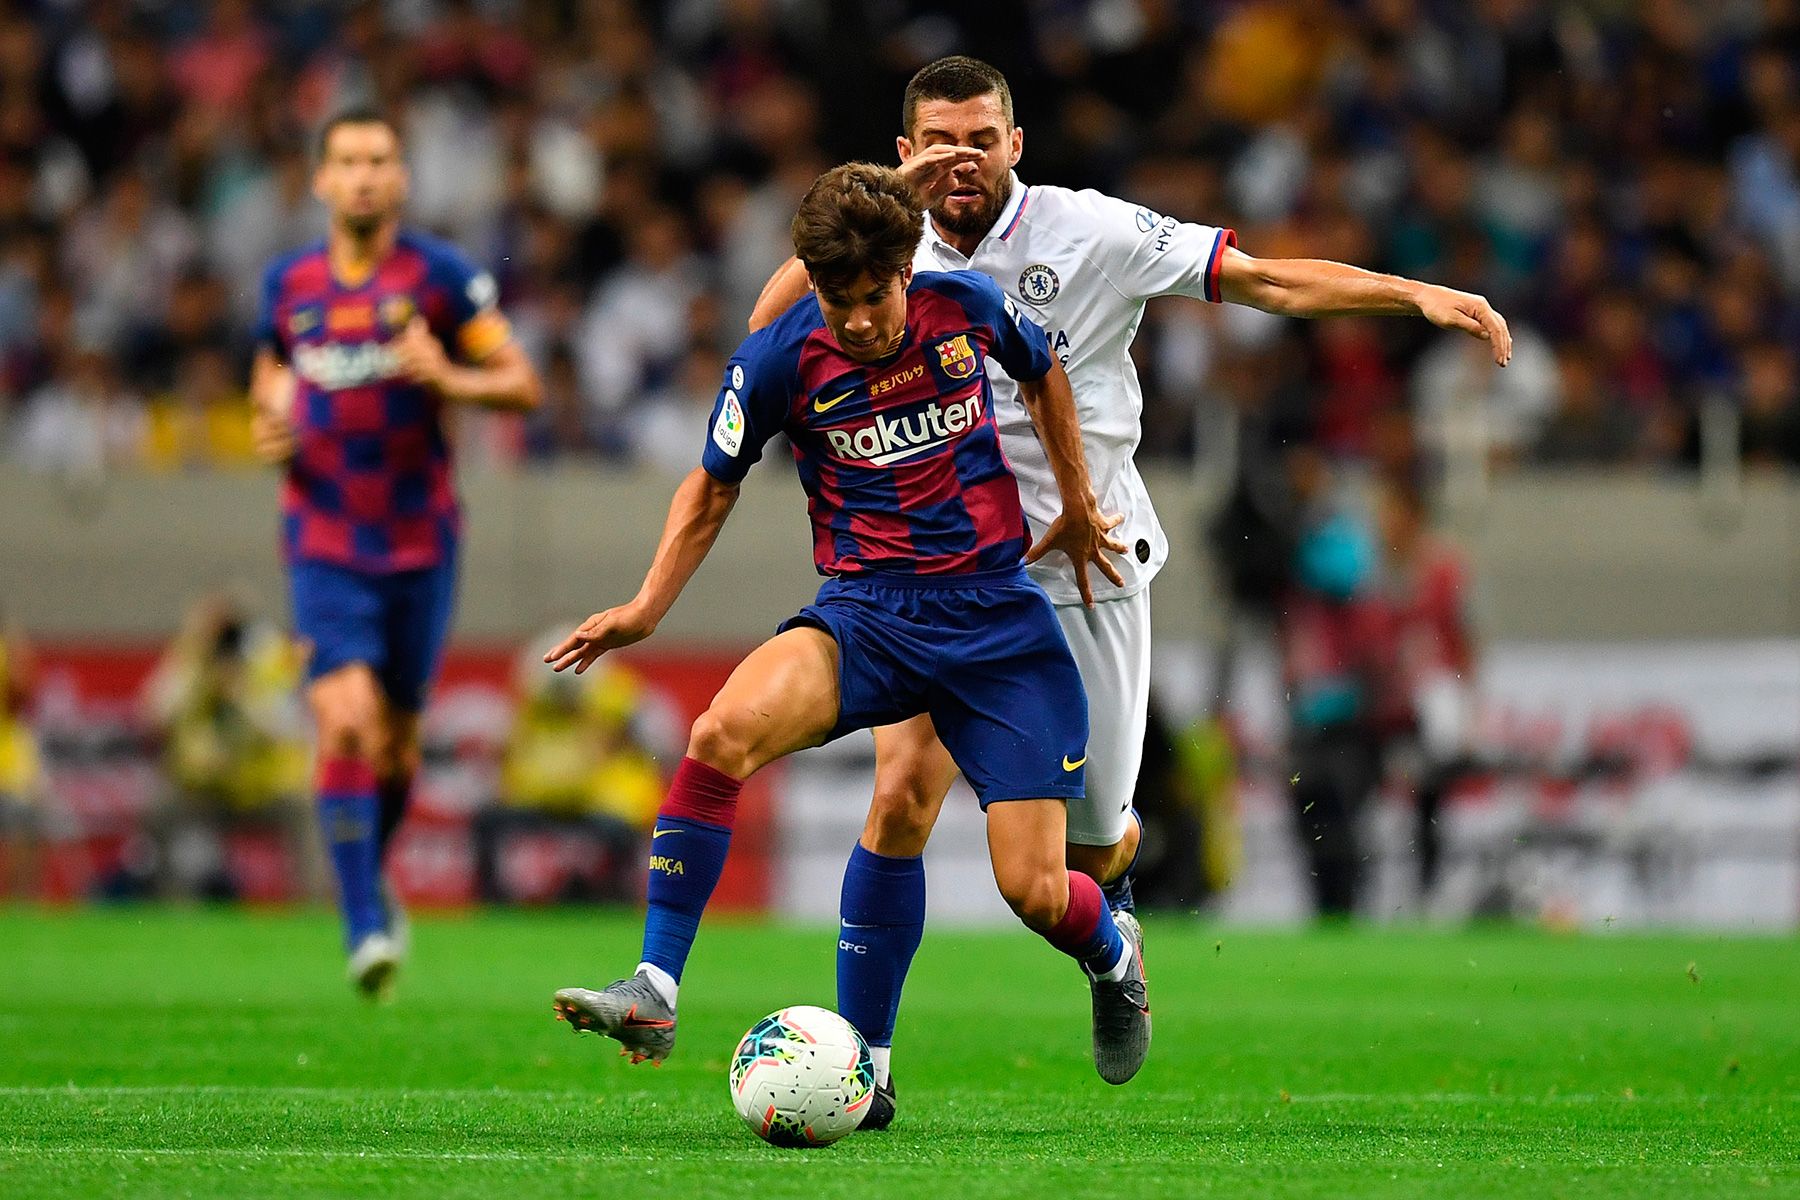 Riqui Puig in the match against Chelsea with Kovacic